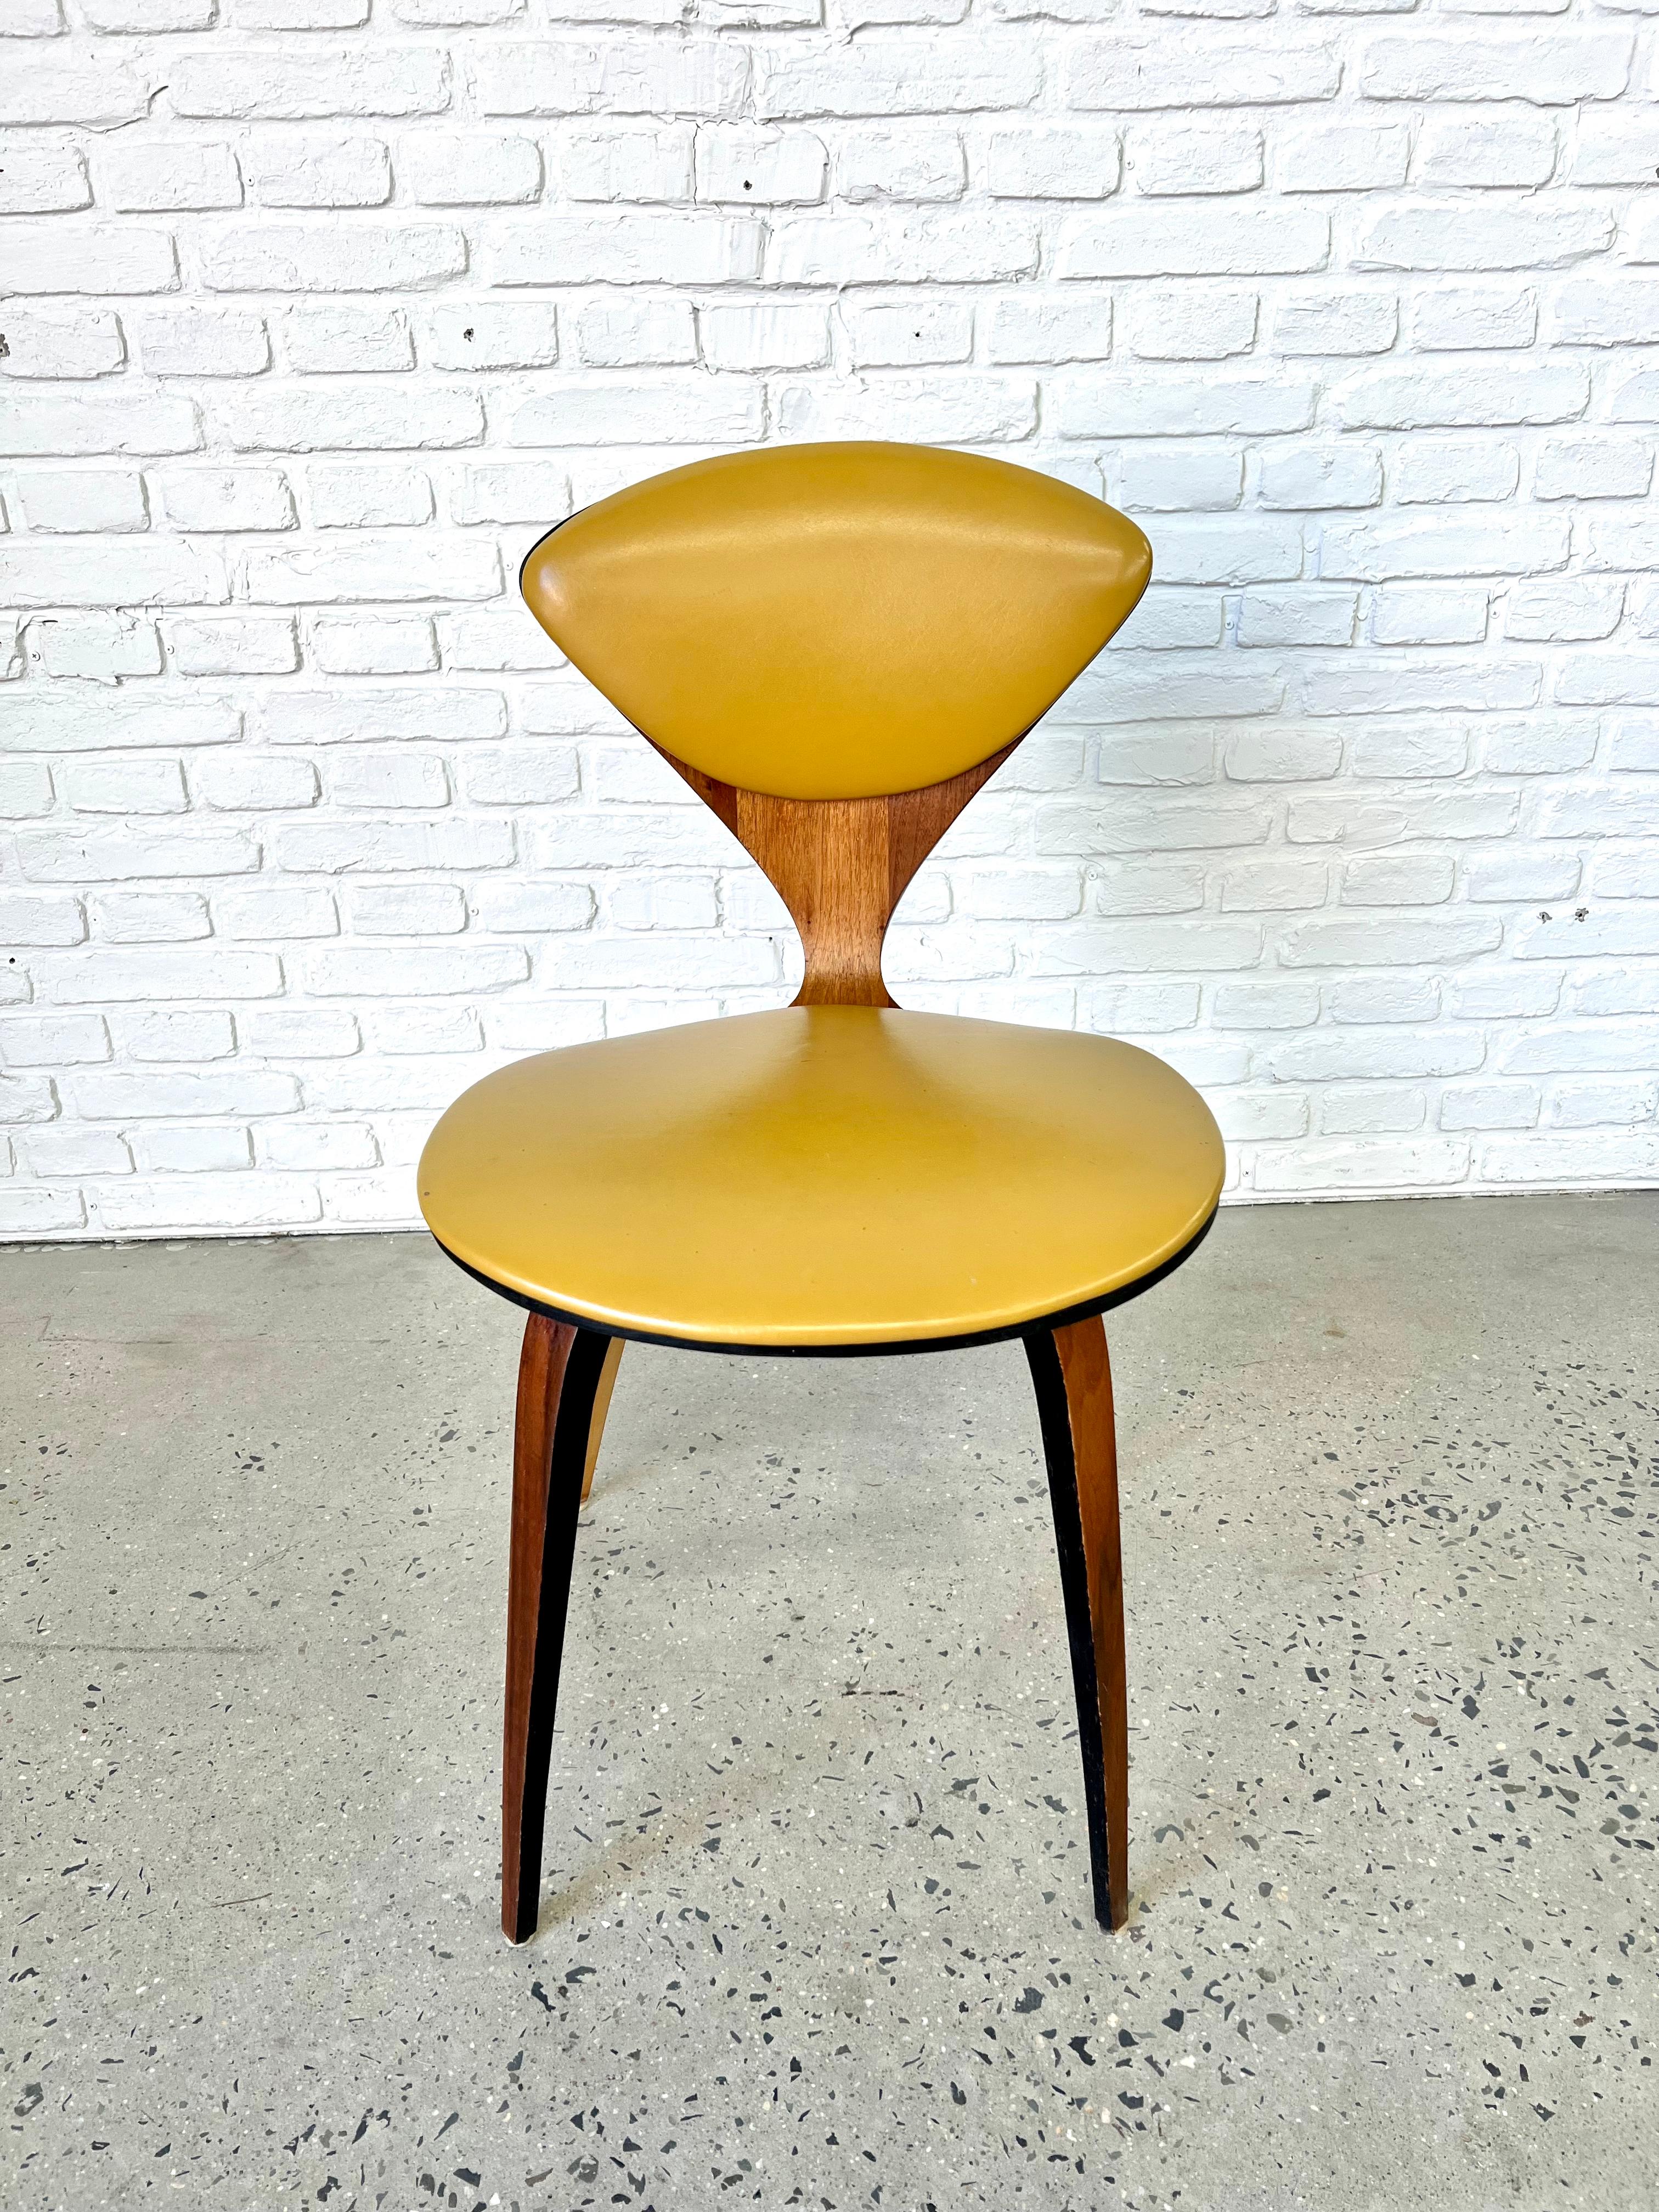 Really cool Mid-Century Modern designer Norman Cherner for Plycraft Bent plywood chair with Yellow Vinyl (Naugahyde) cushion from the 1960s.  This would have originally been used as a dining chair in a set, however, most people today enjoy using